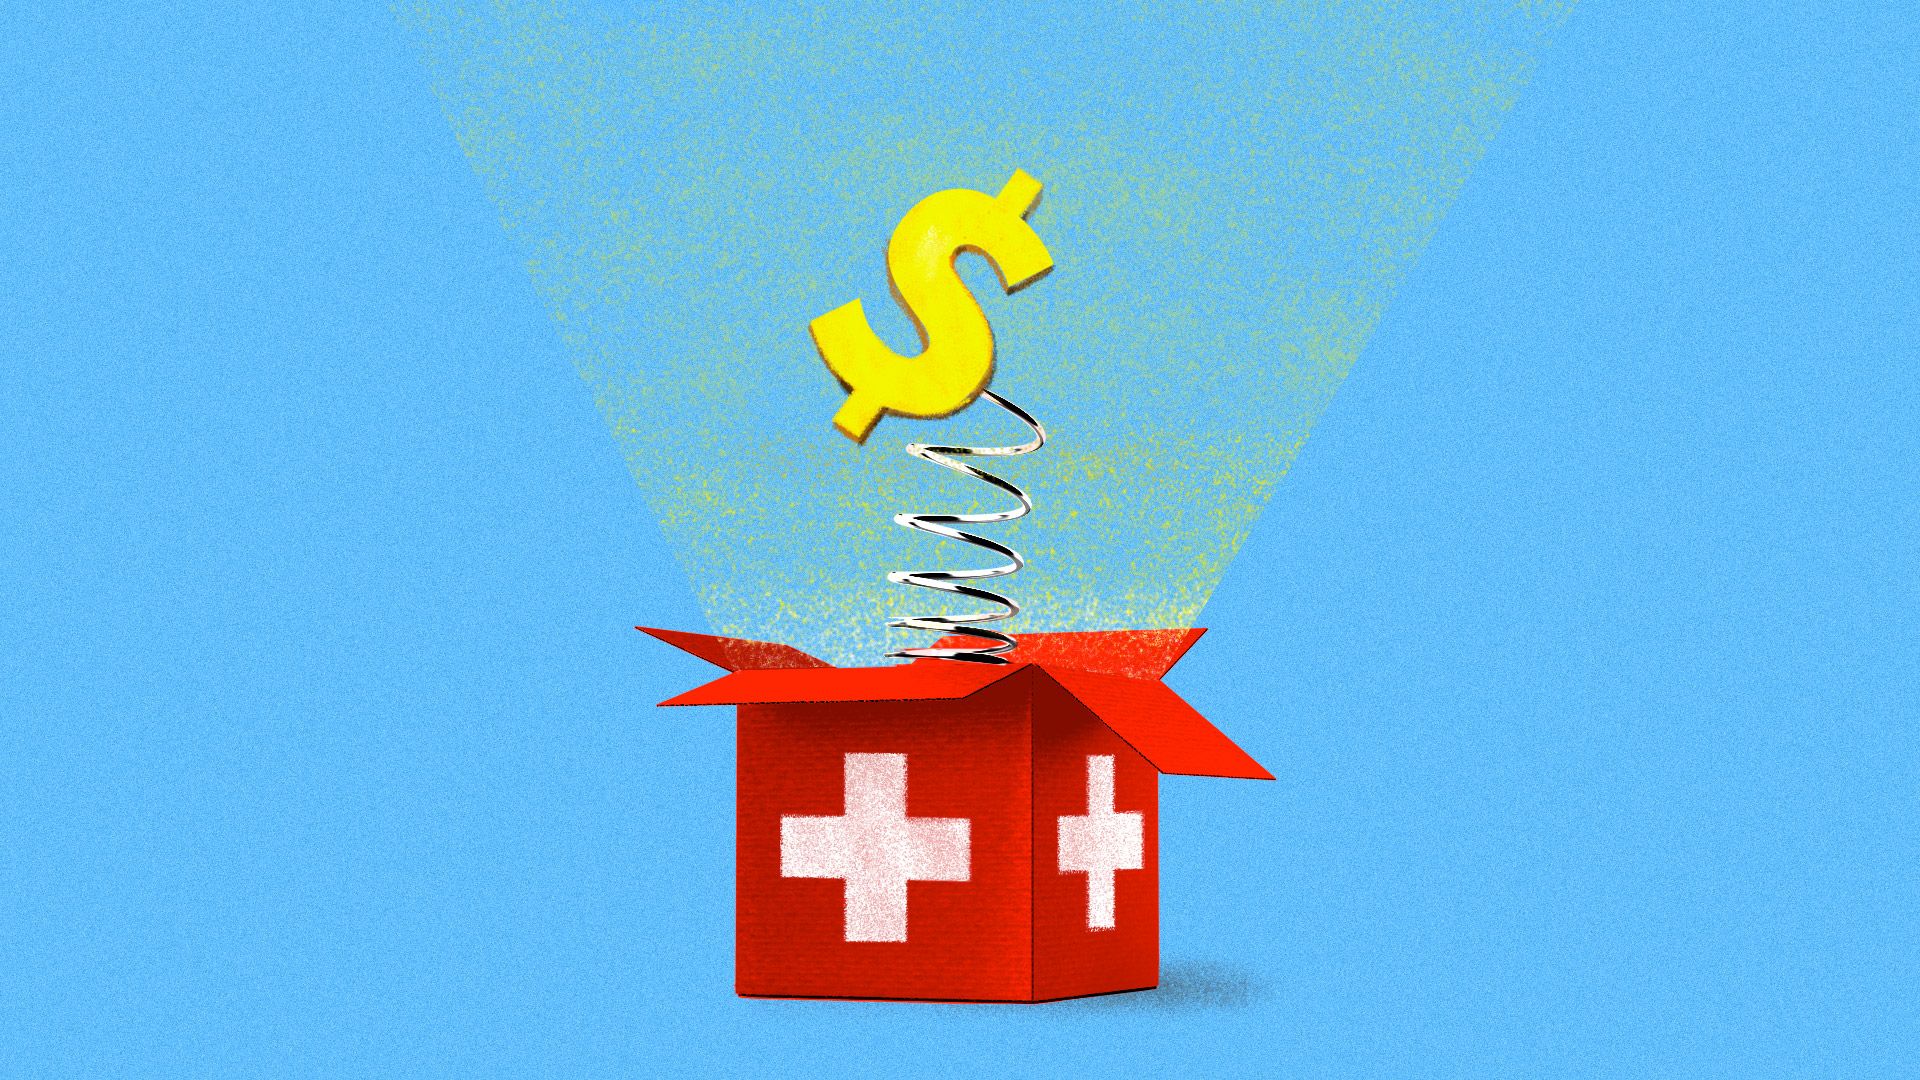 An illustration of a dollar sign springing out of a box with a health care cross on it.